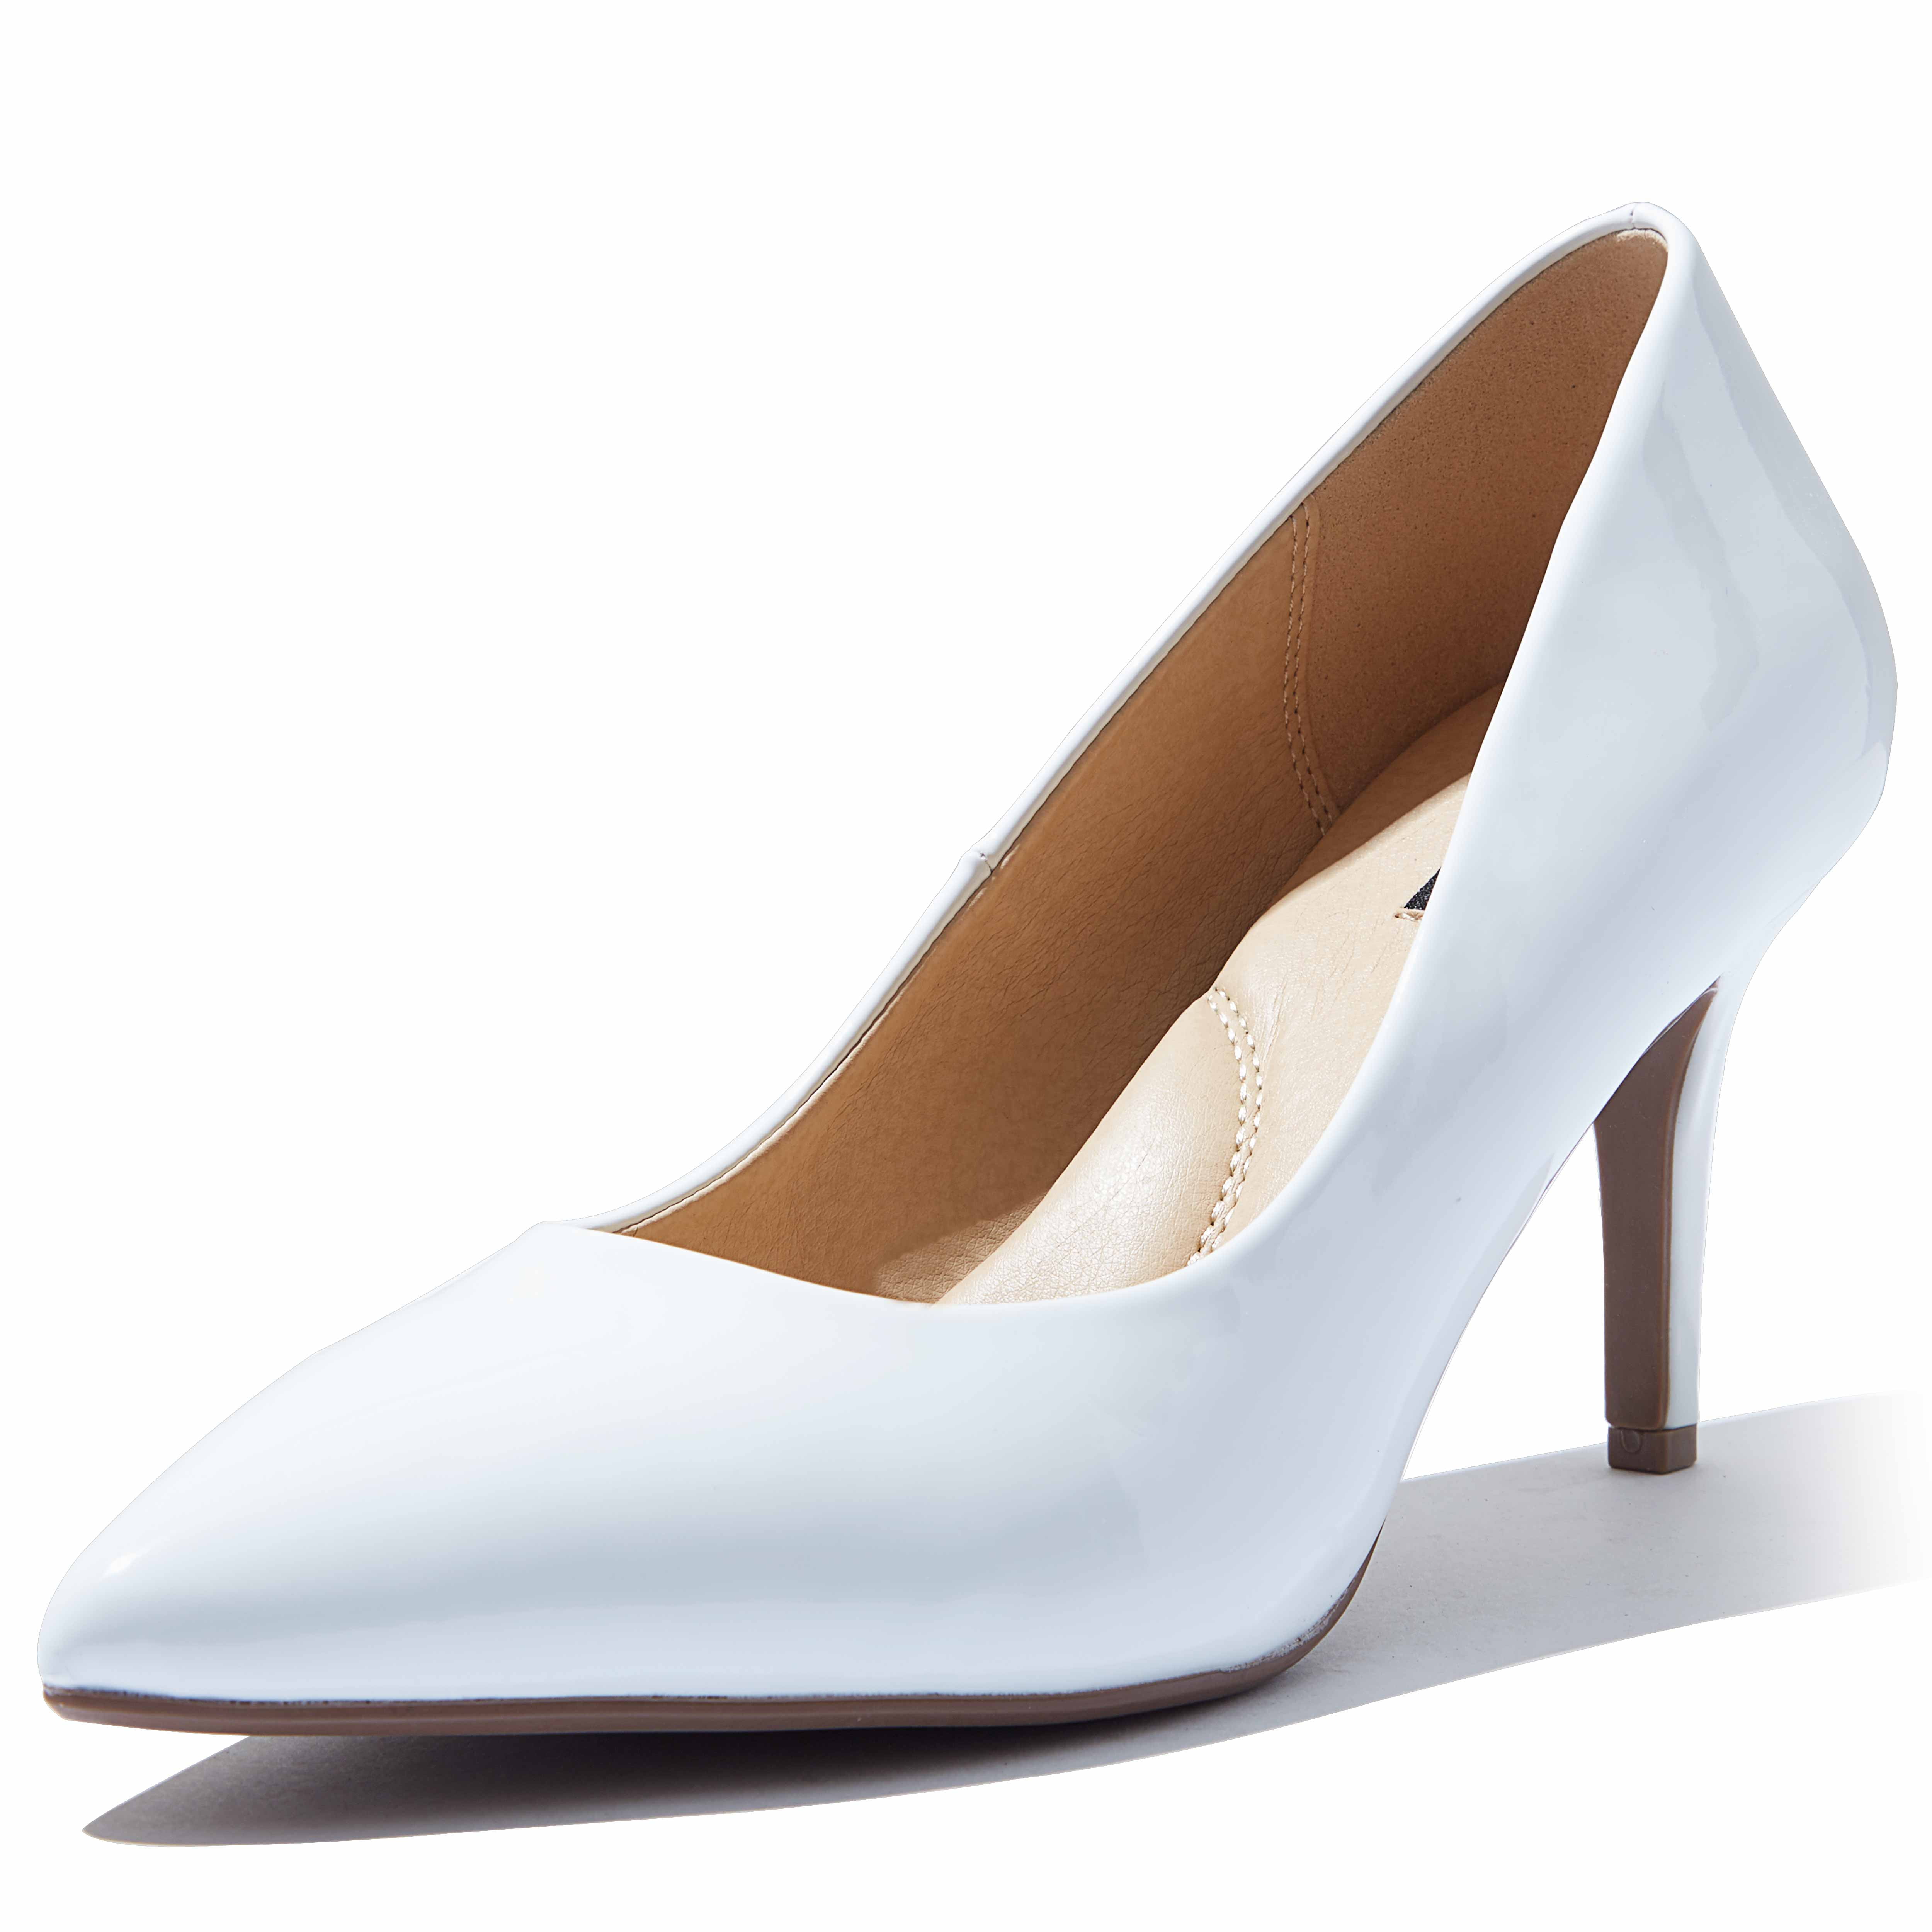 Womens Classic Pointed Toe Slip On Dress Shoes Low Heel Pumps Wedding Shoe 